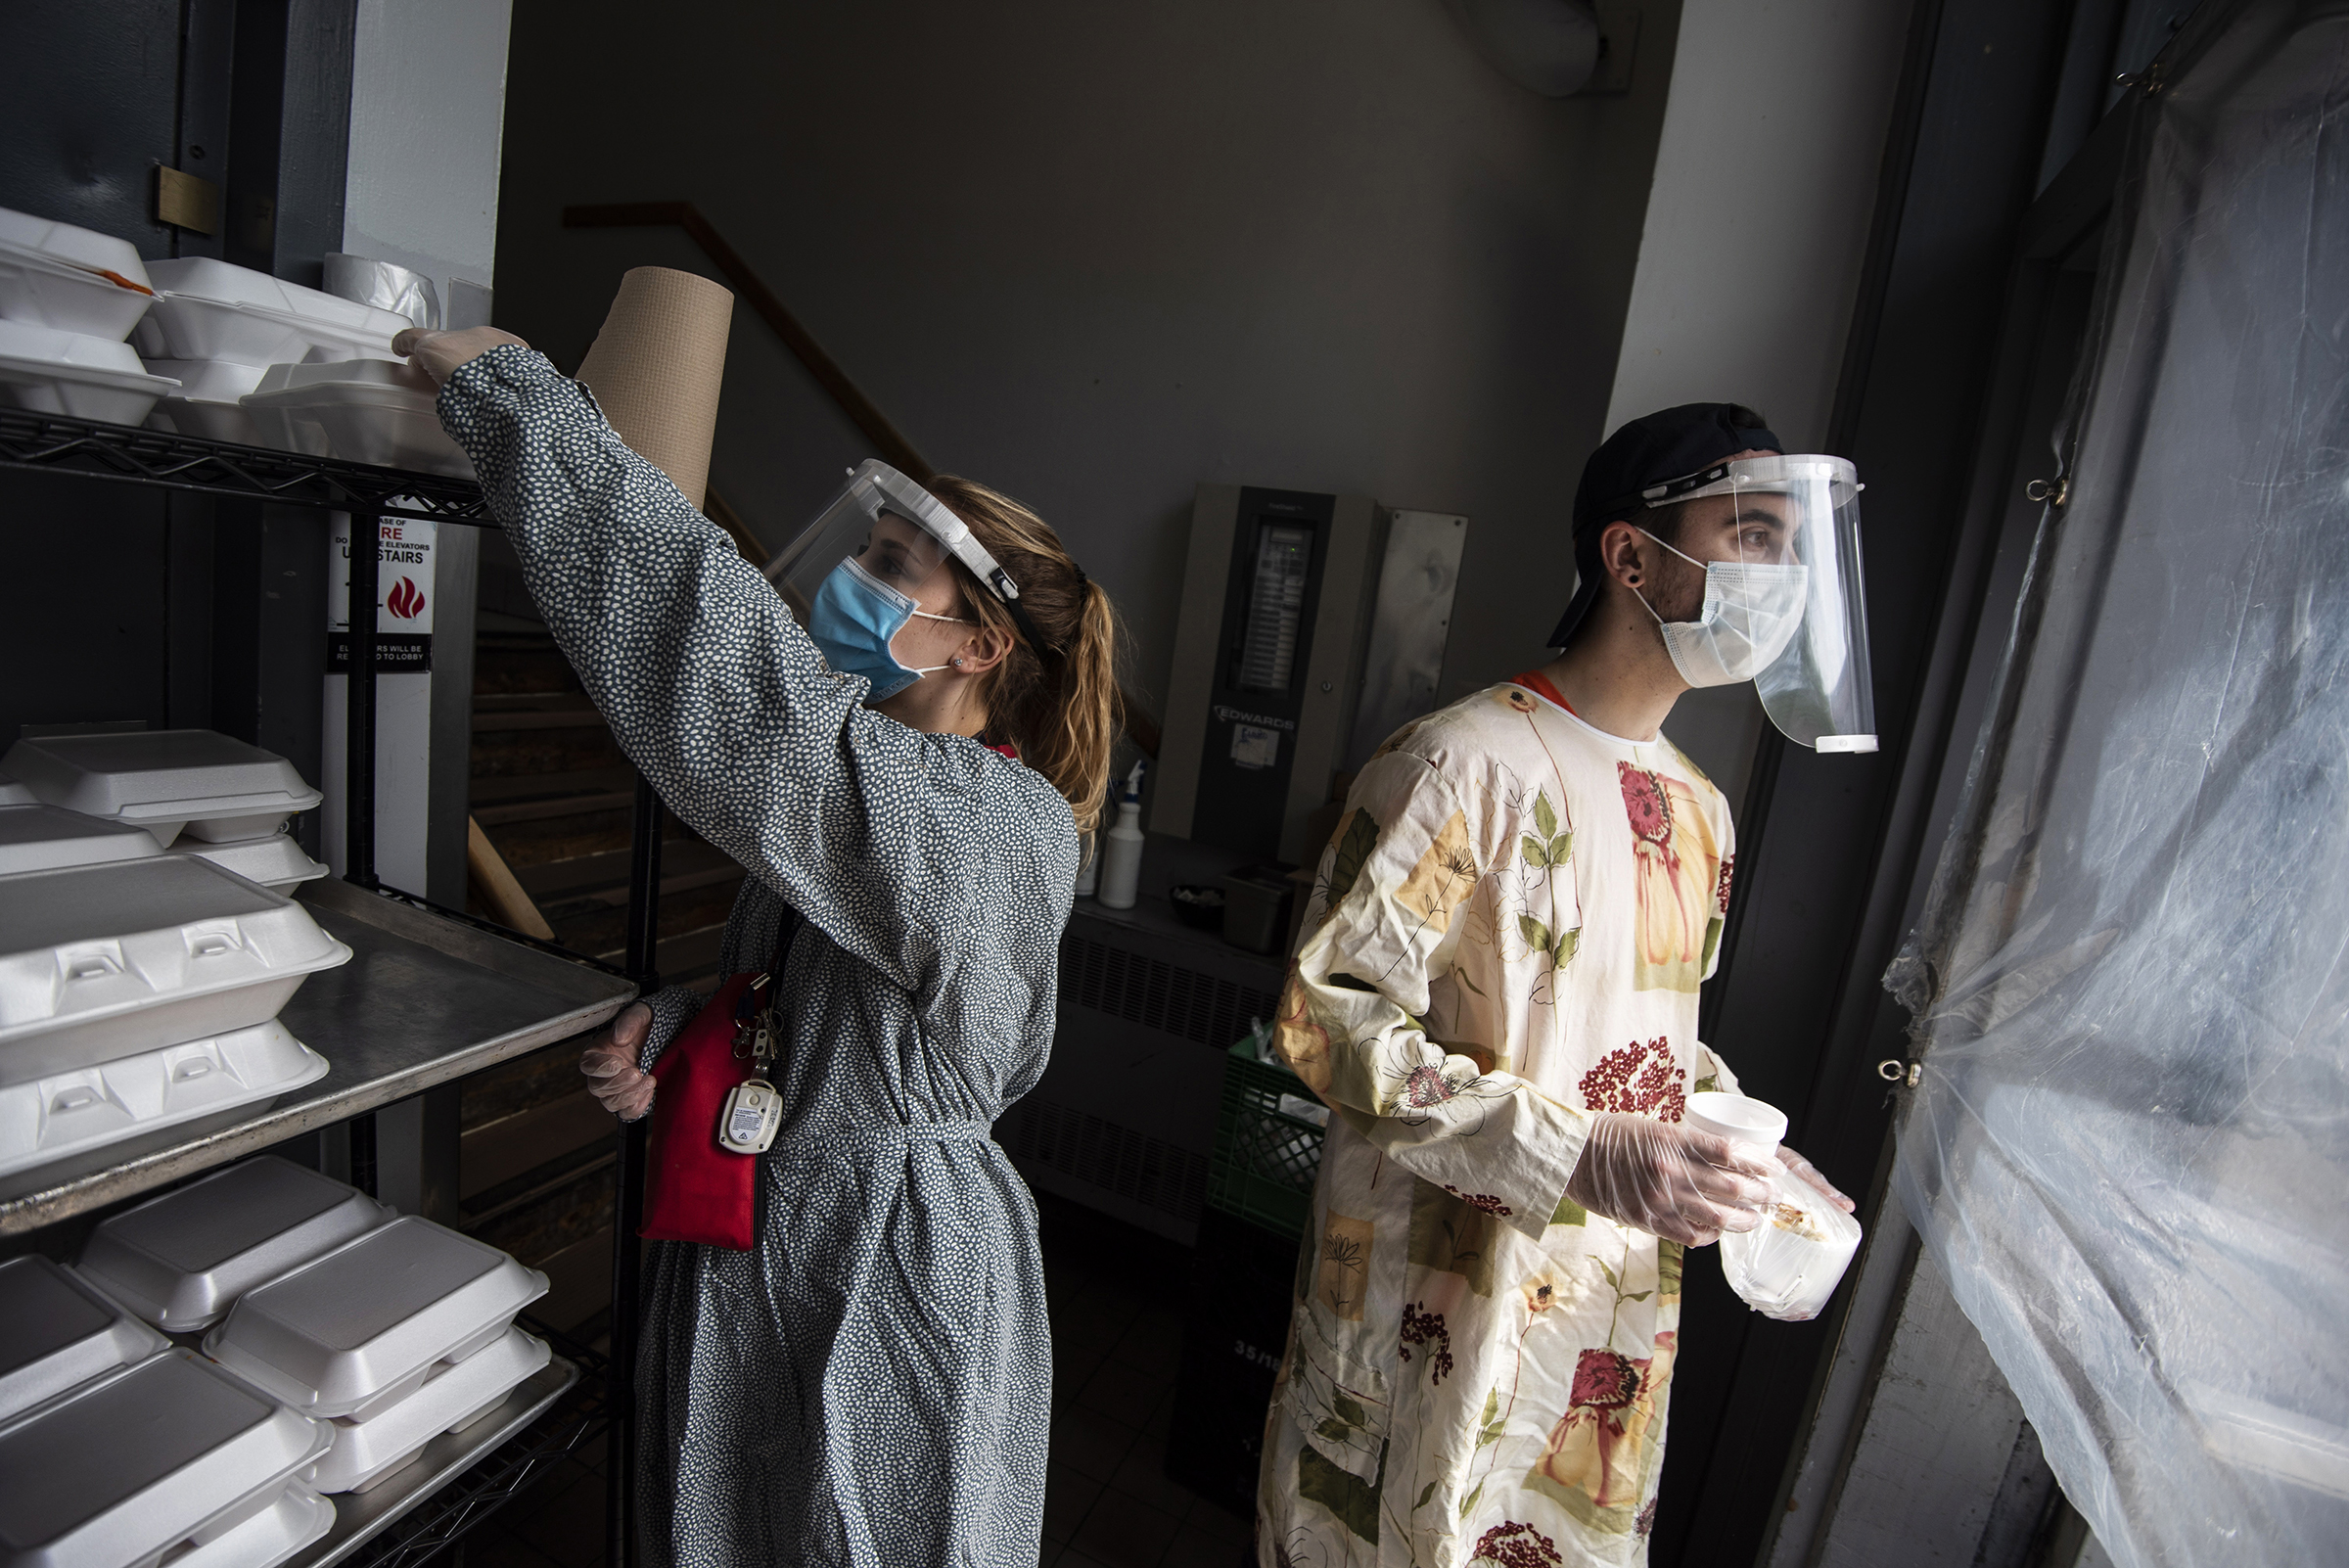 Staff members Celine Robitaille, left, and Dean Dewar wear gloves, face shields and gowns as they hand out meals at lunchtime at the Shepherds of Good Hope soup kitchen in Ottawa, Ontario, on May 24, 2020. (Justin Tang—The Canadian Press via AP)